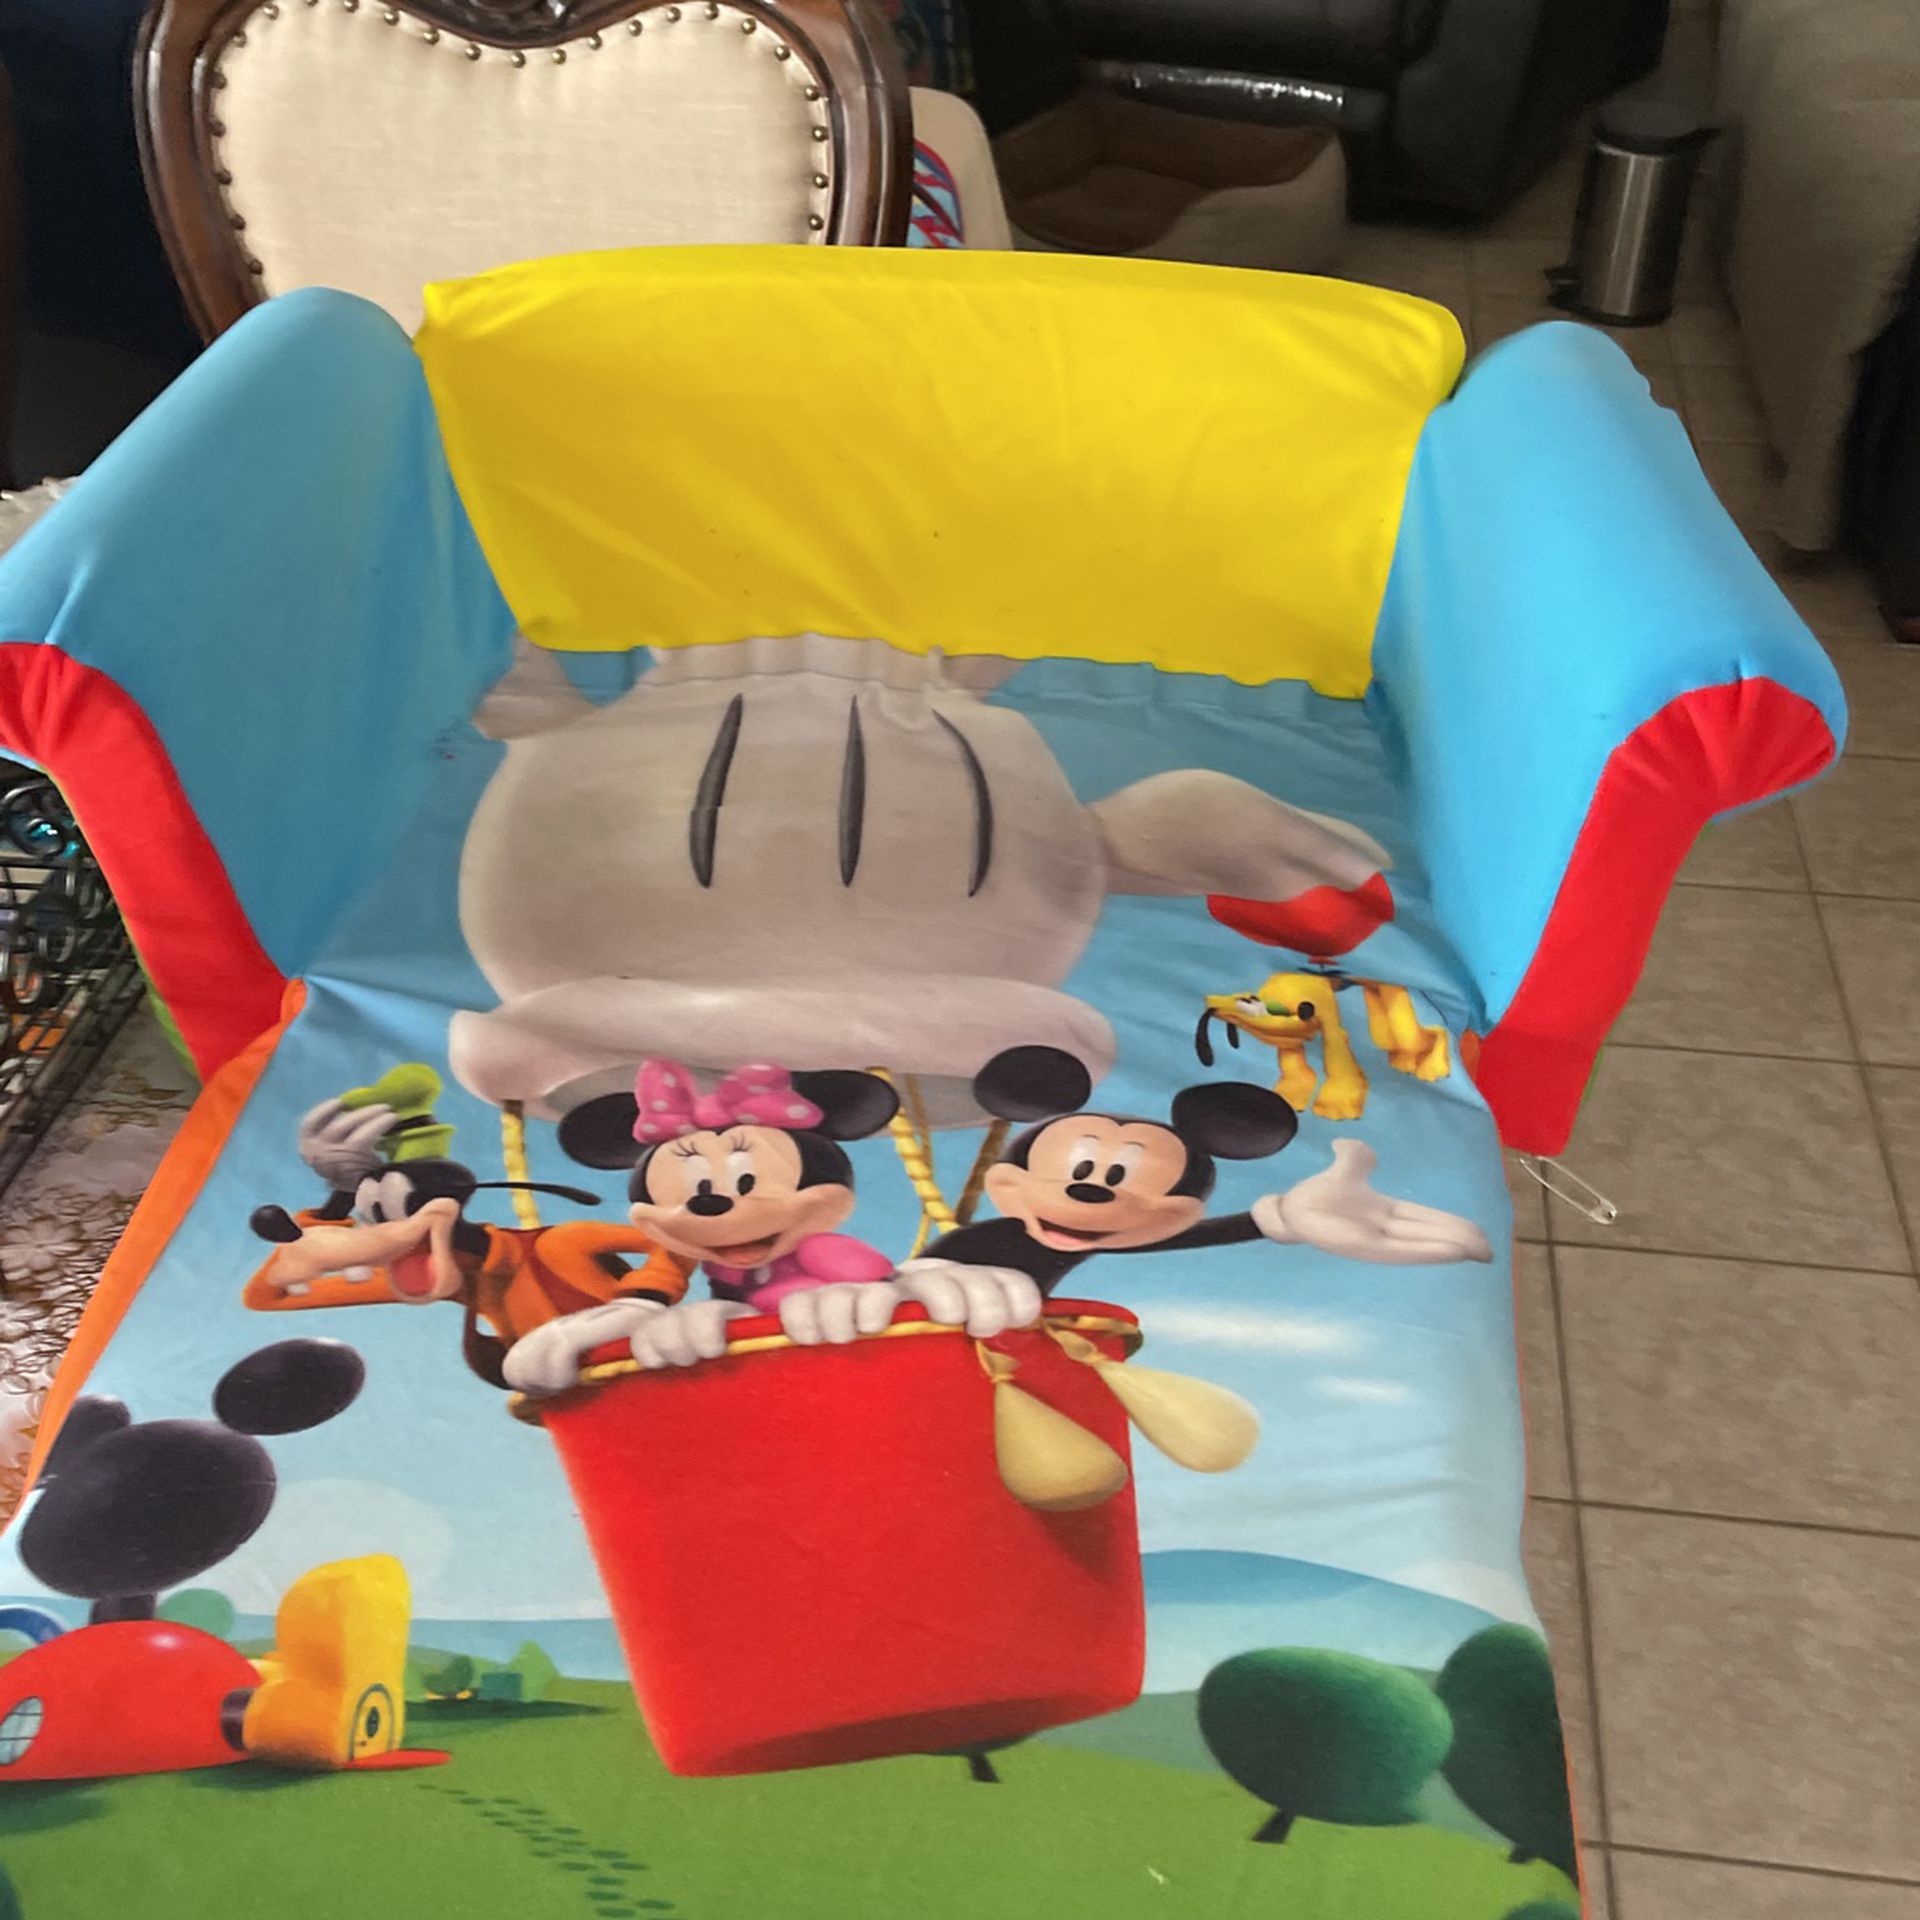 Baby Bed For Day Time Mickey Mouse Or Chair